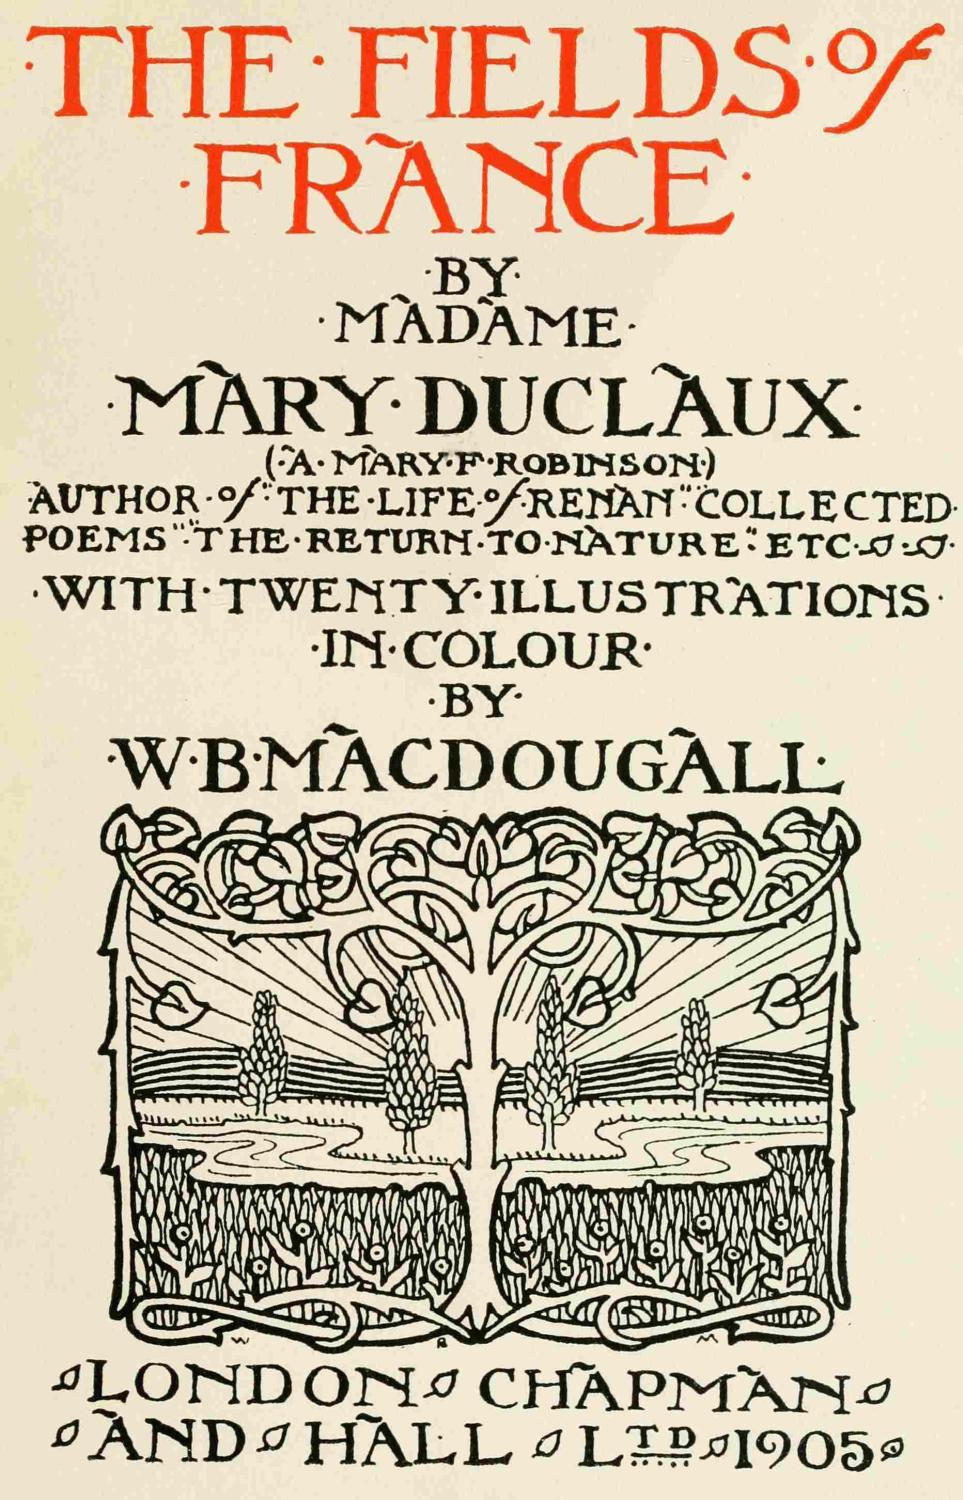 The Project Gutenberg eBook of Fields of France, by Mary Duclaux.